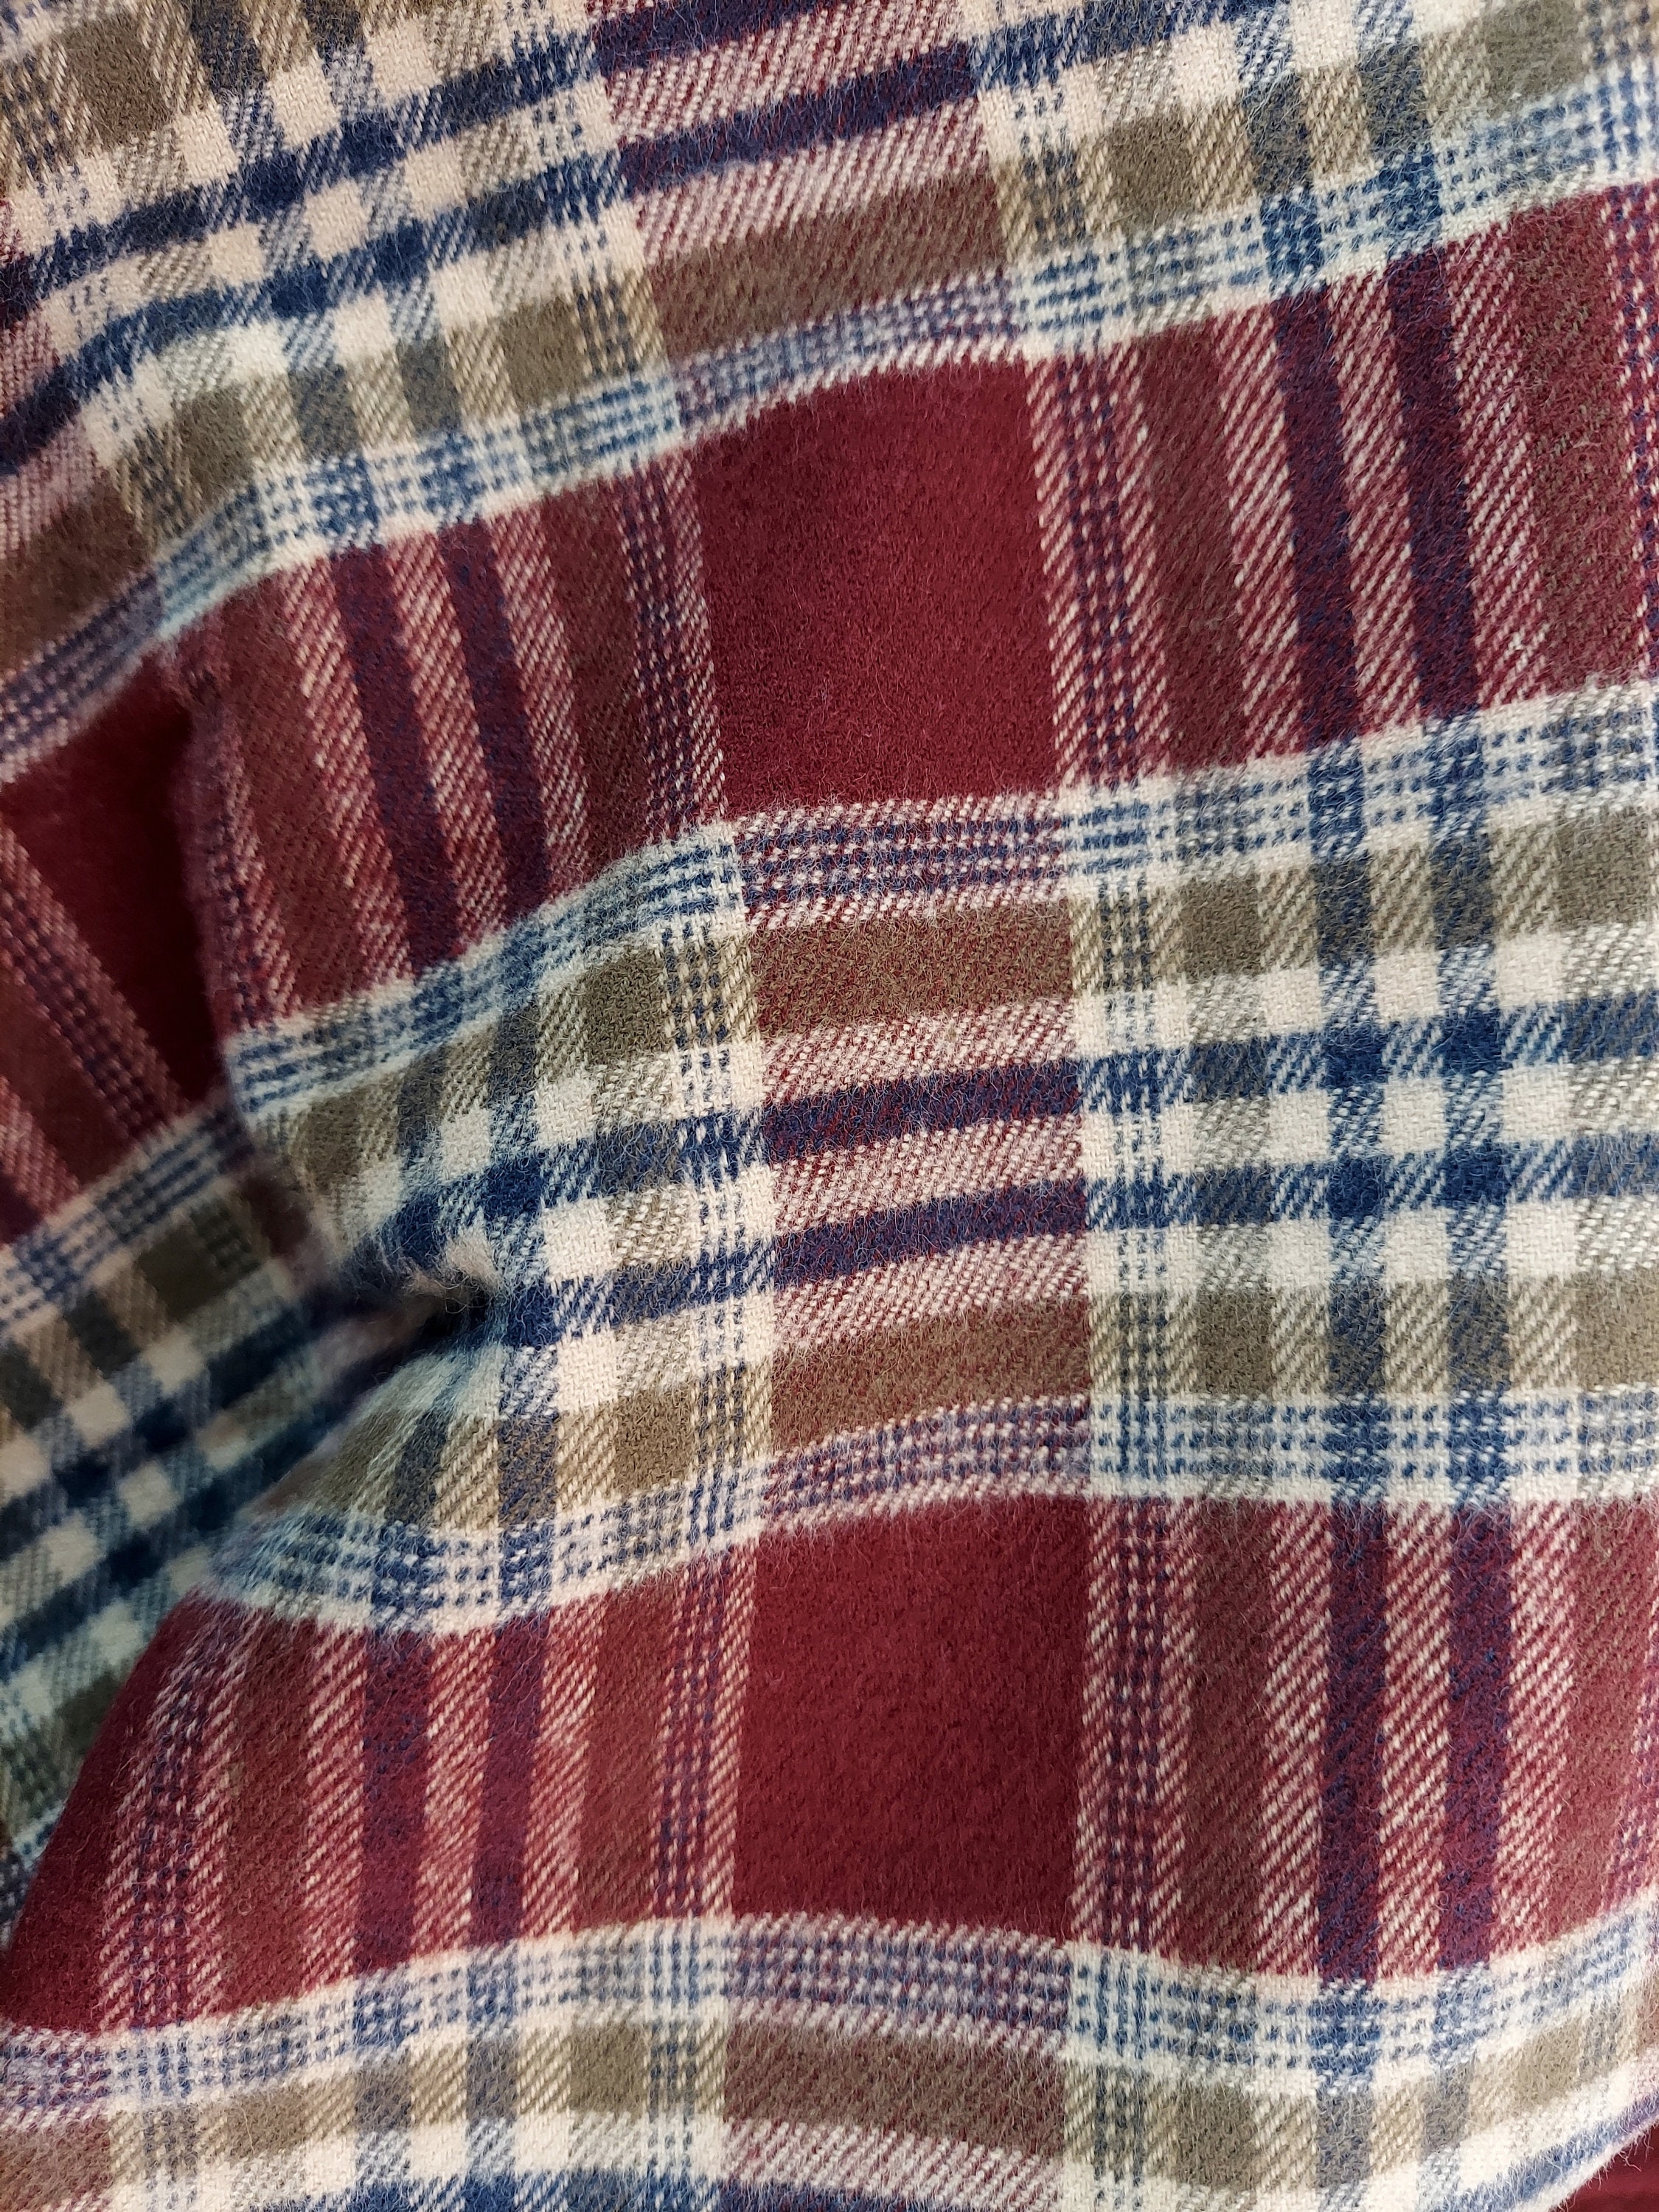 Fields Cotton Flannel Stitched Patchwork Madras Plaid Squares in Burgundy  Navy Light Blue Kelly Forest Green Gray White 44 Wide Cotton Flannel Fabric